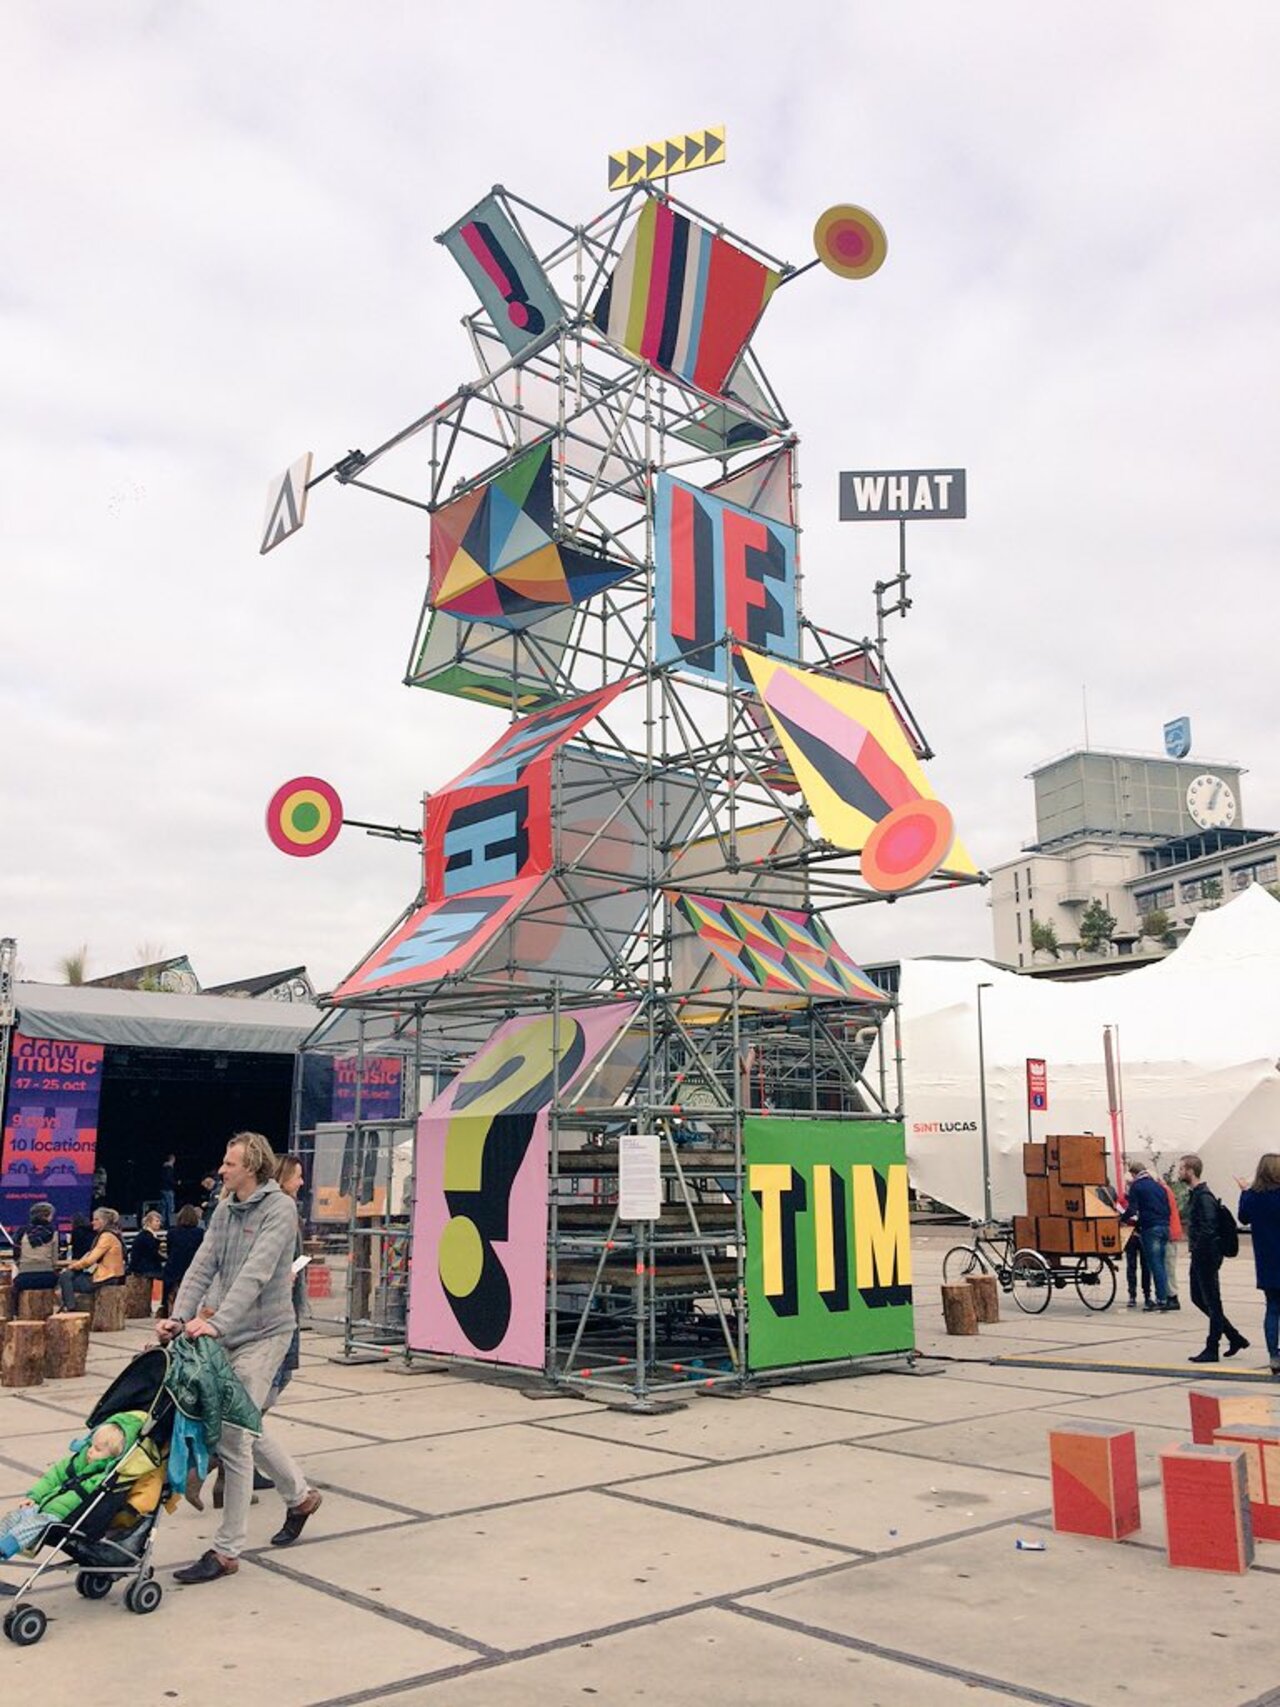 Day two at #DDW15 #architecture #graffiti #installations https://t.co/WB86VXCNvS